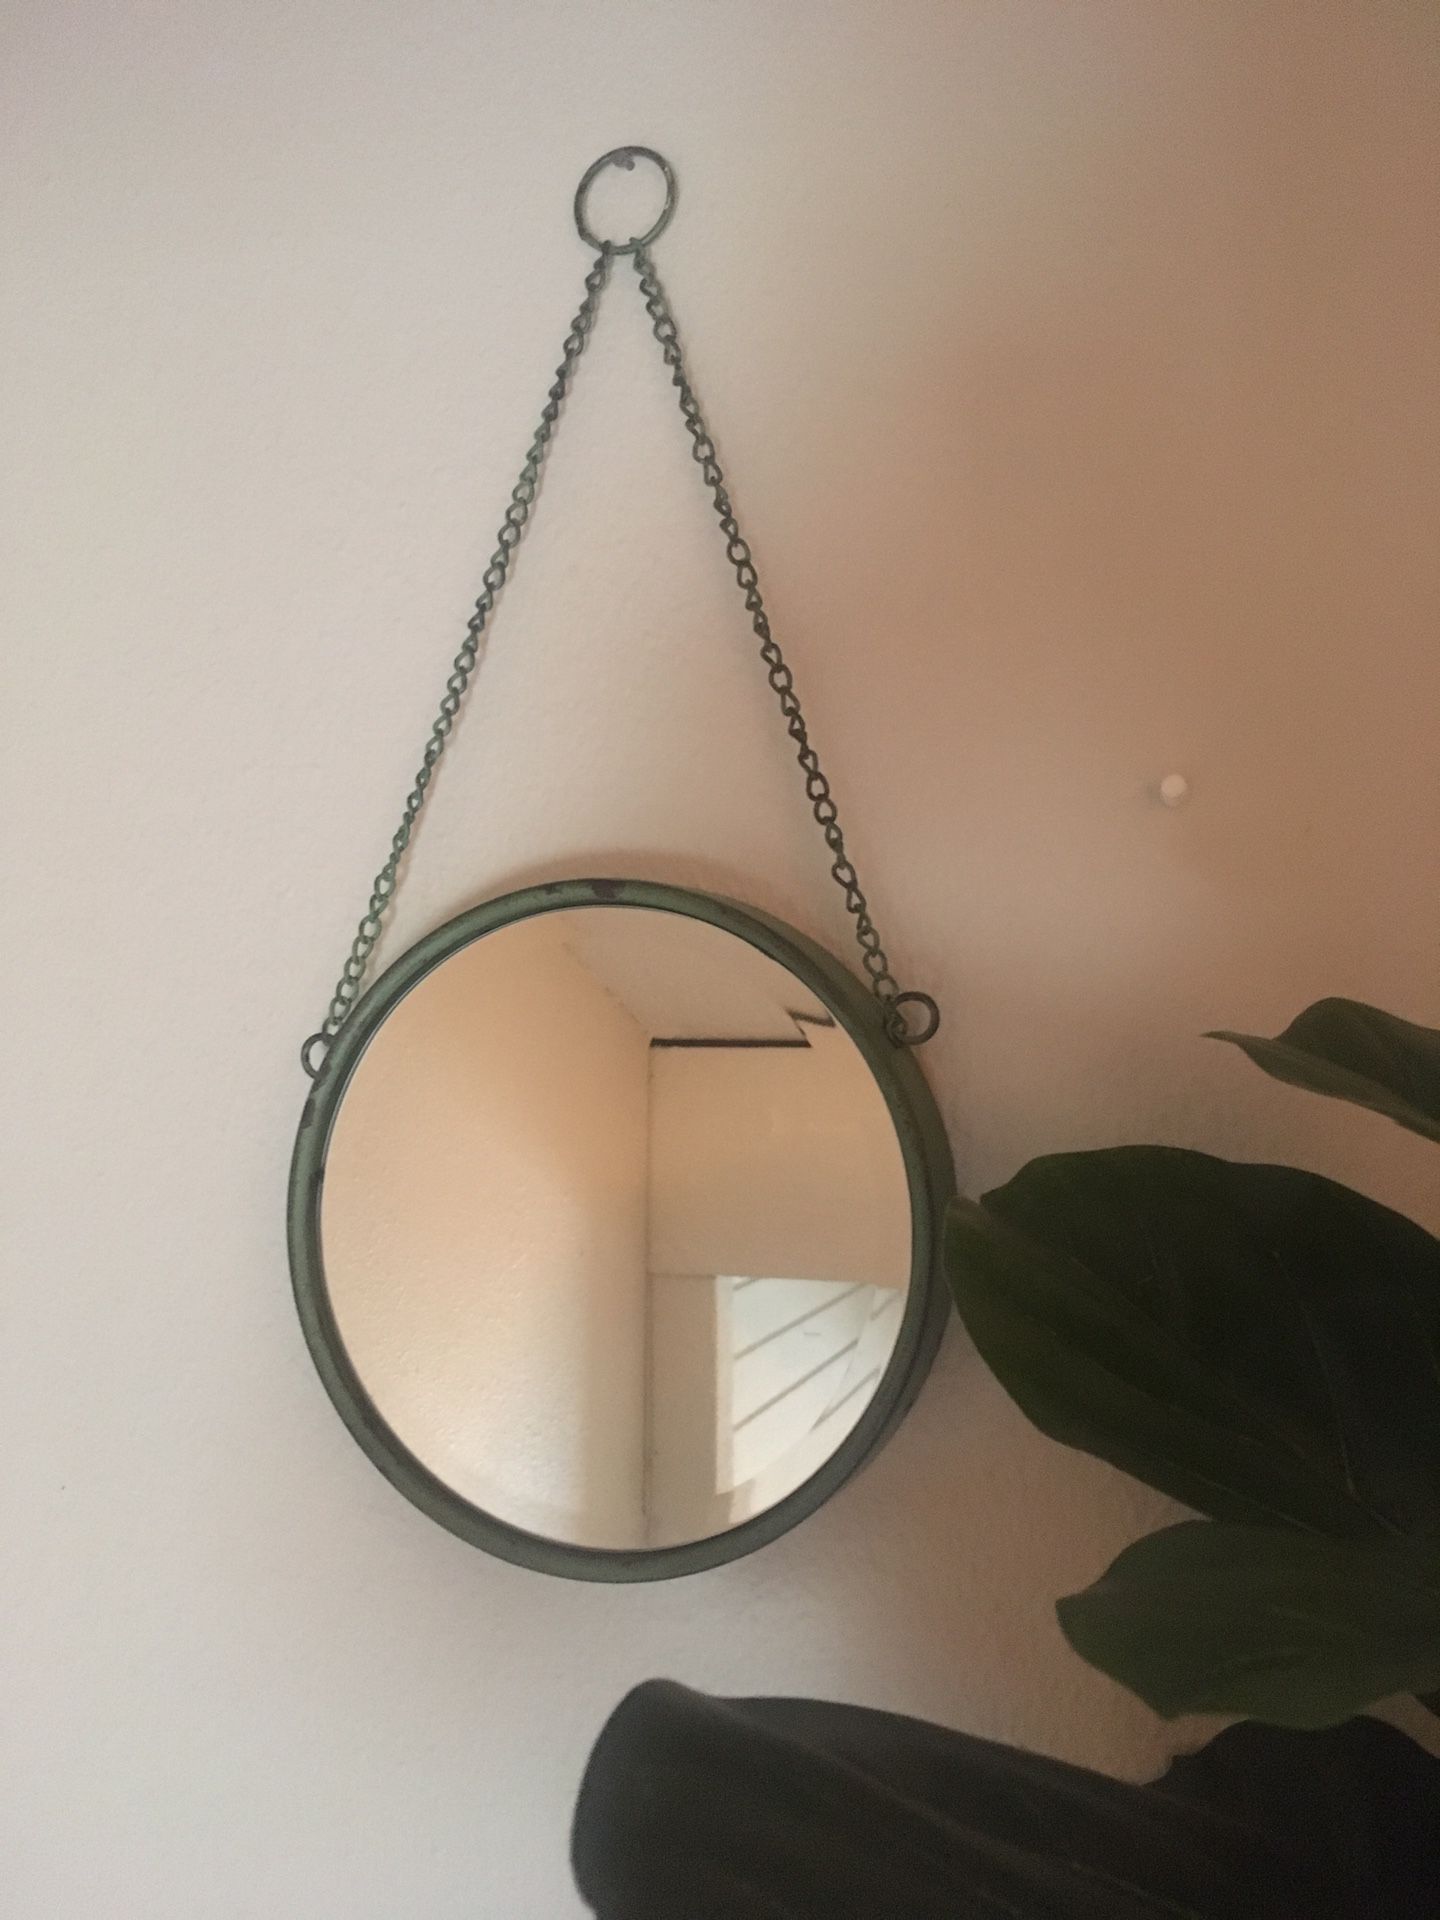 Rustic round wall hanging mirror